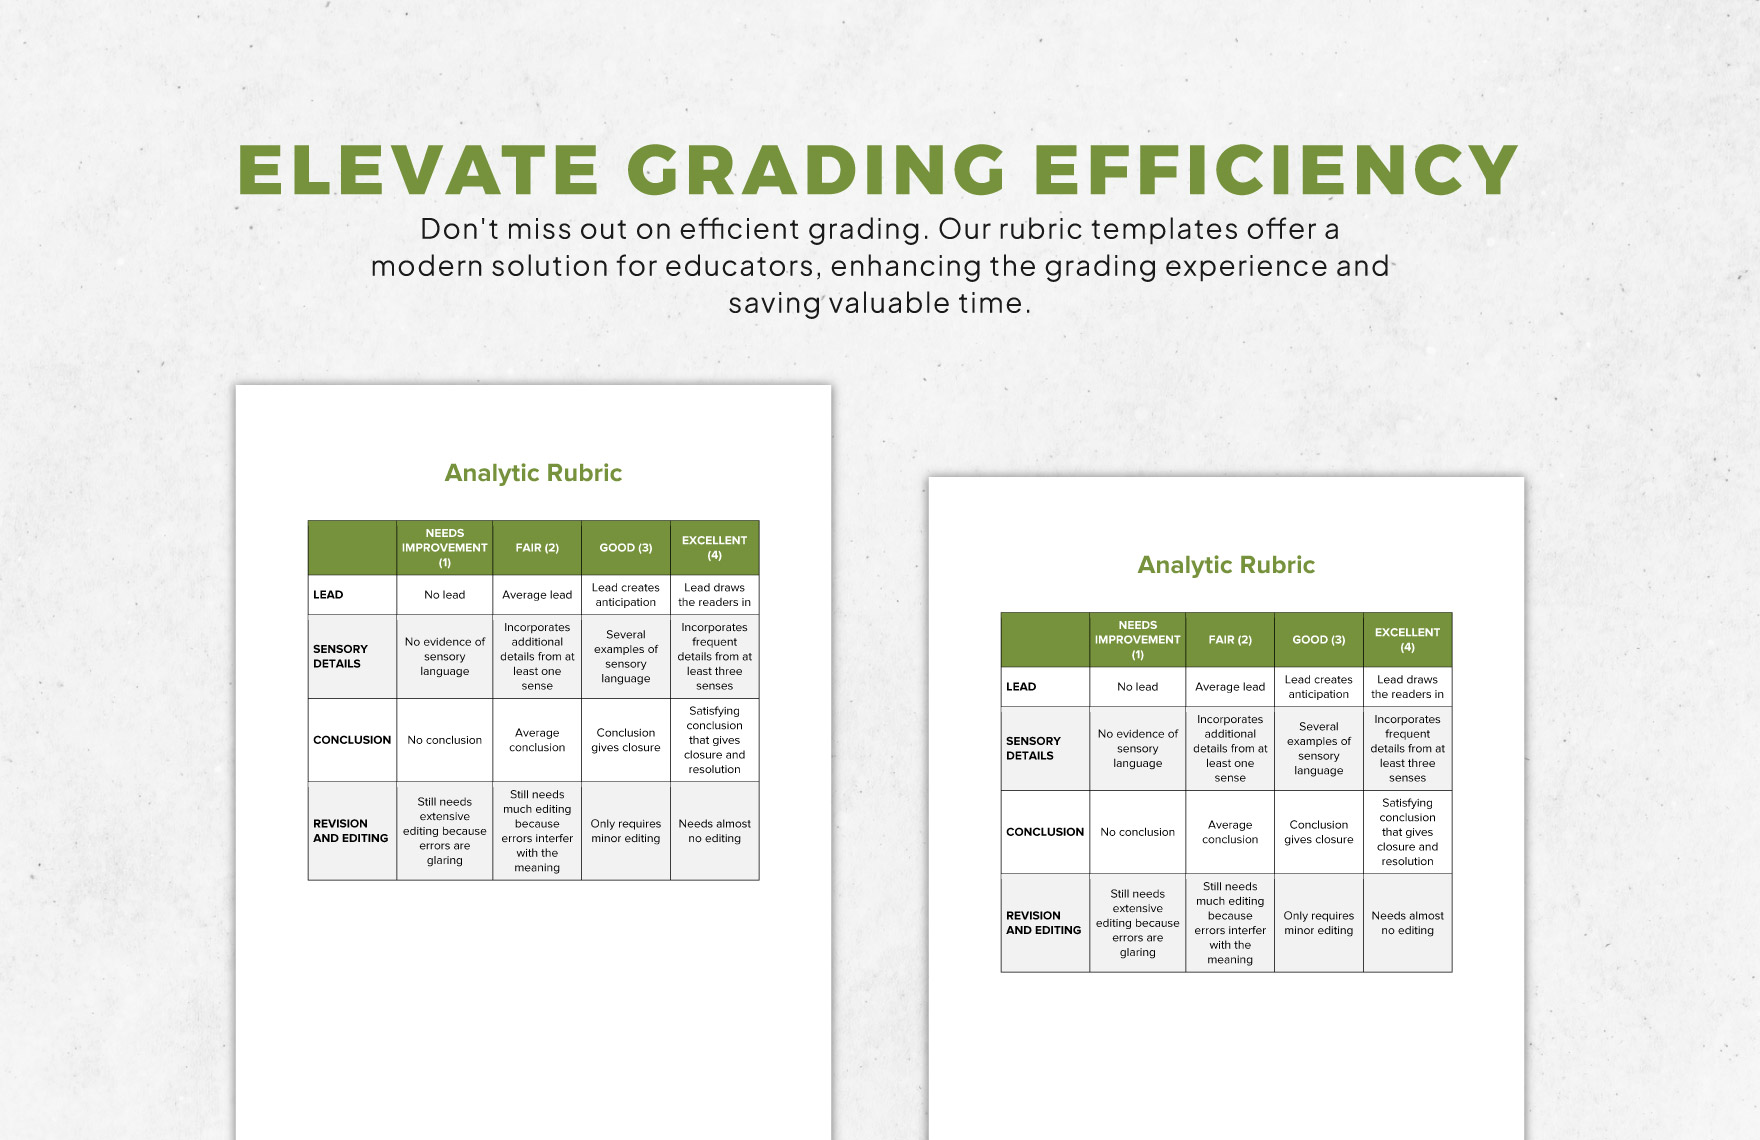 Analytic Rubric Template